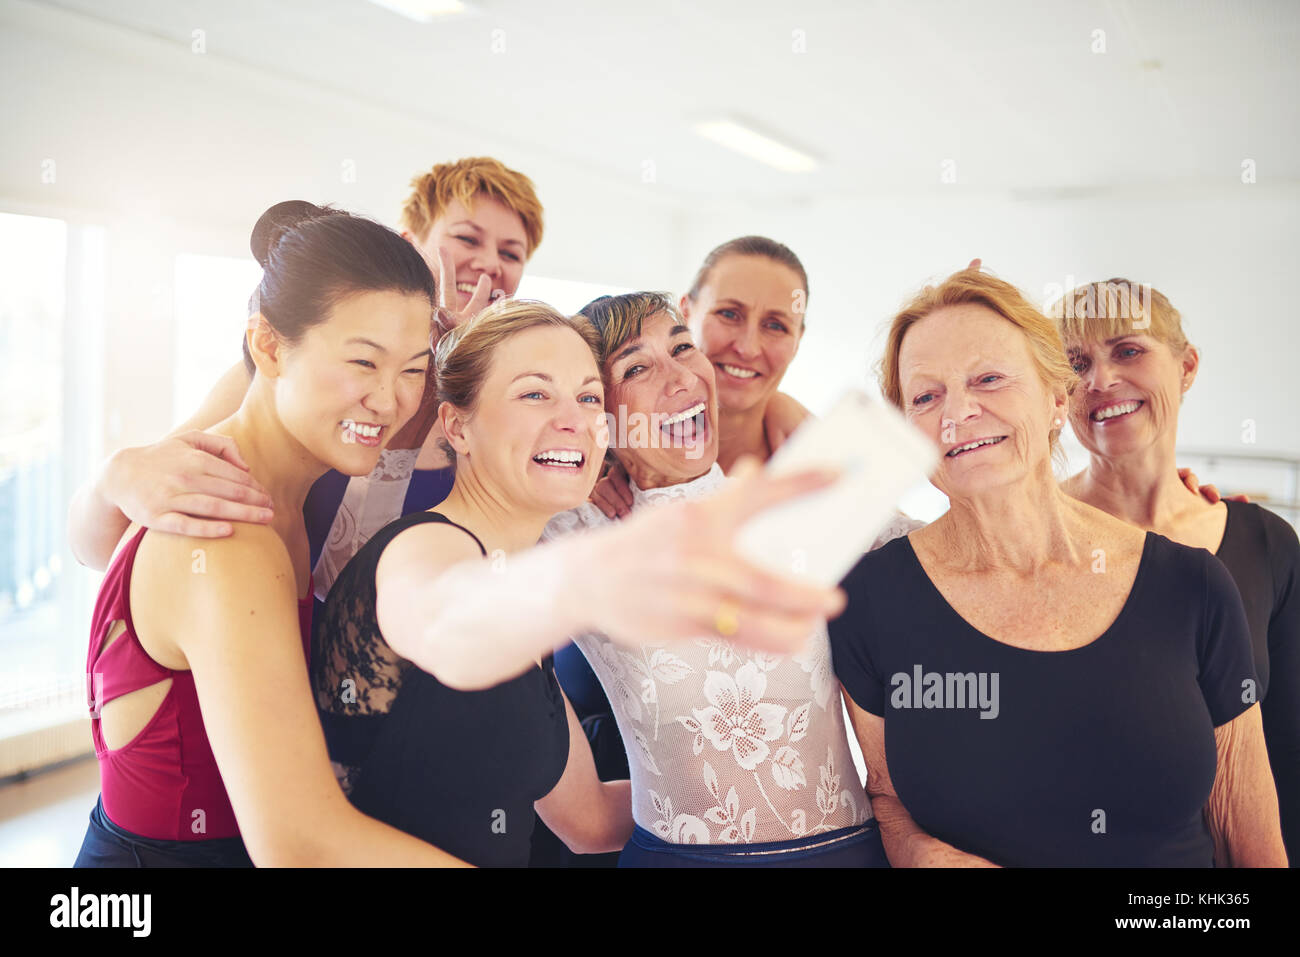 Mixed age group of women laughing while standing together taking selfies during ballet class in a dance studio Stock Photo